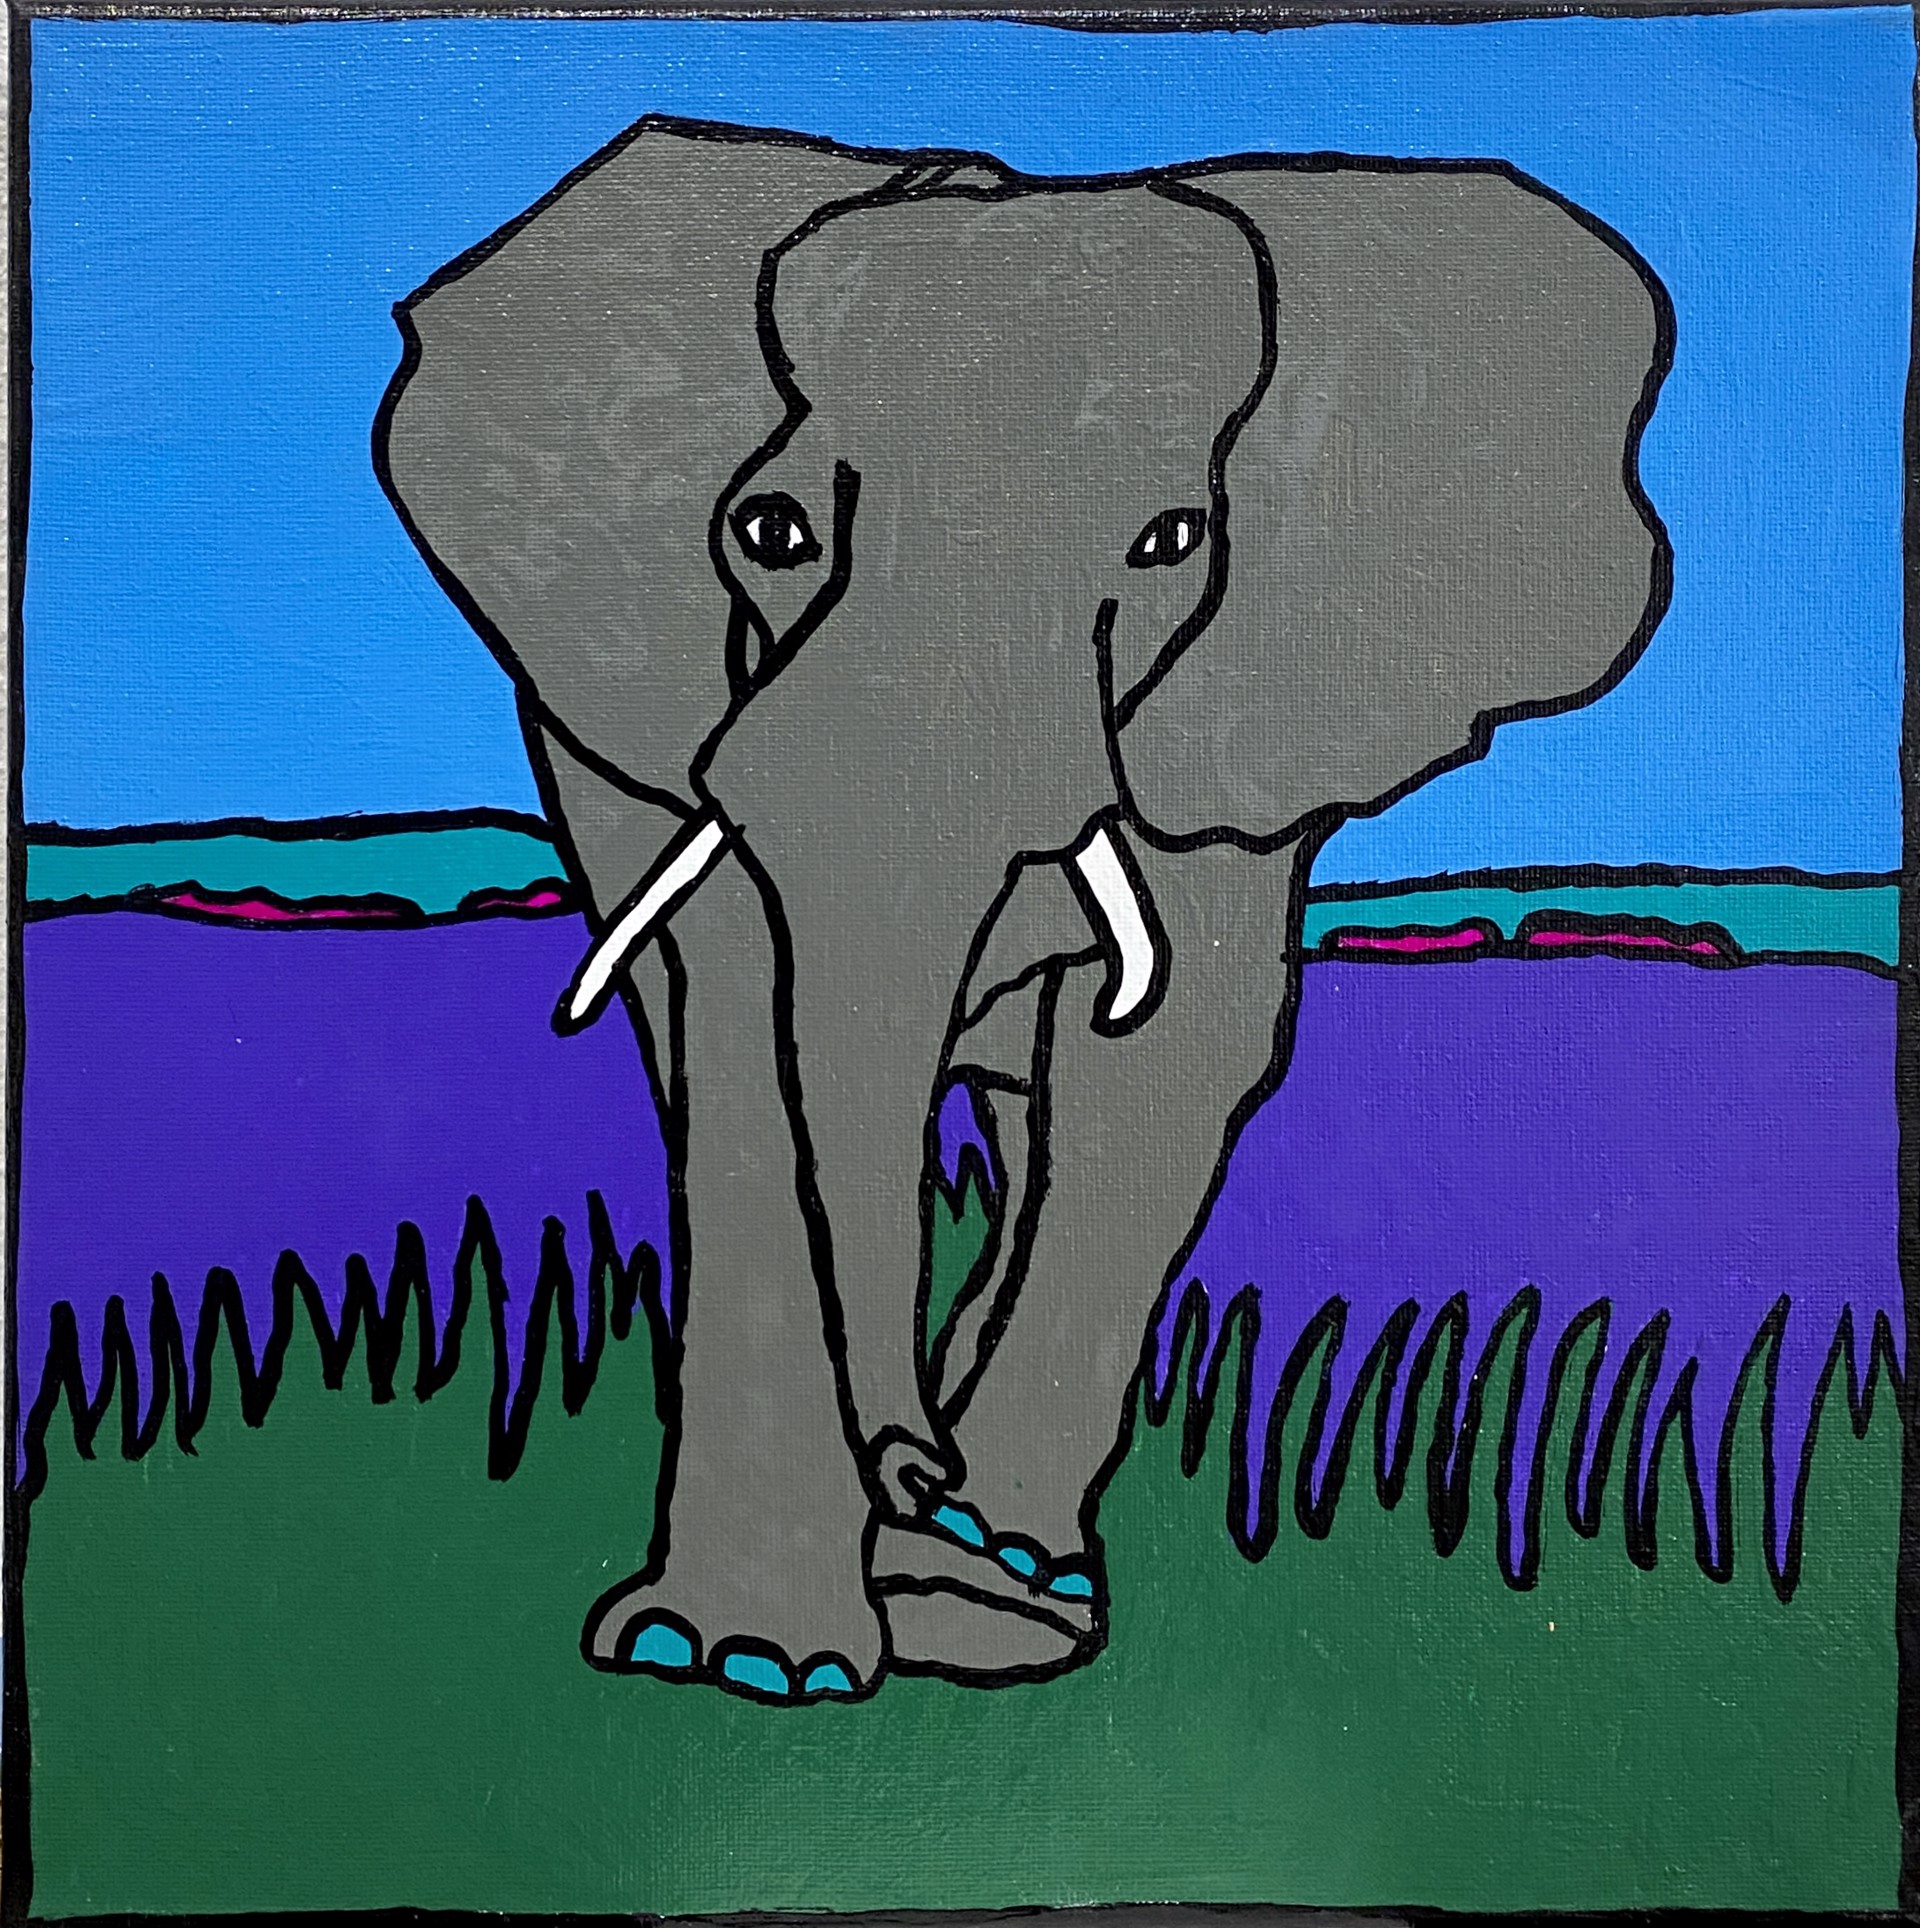 "Elephant" by Malcolm E. by One Step Beyond